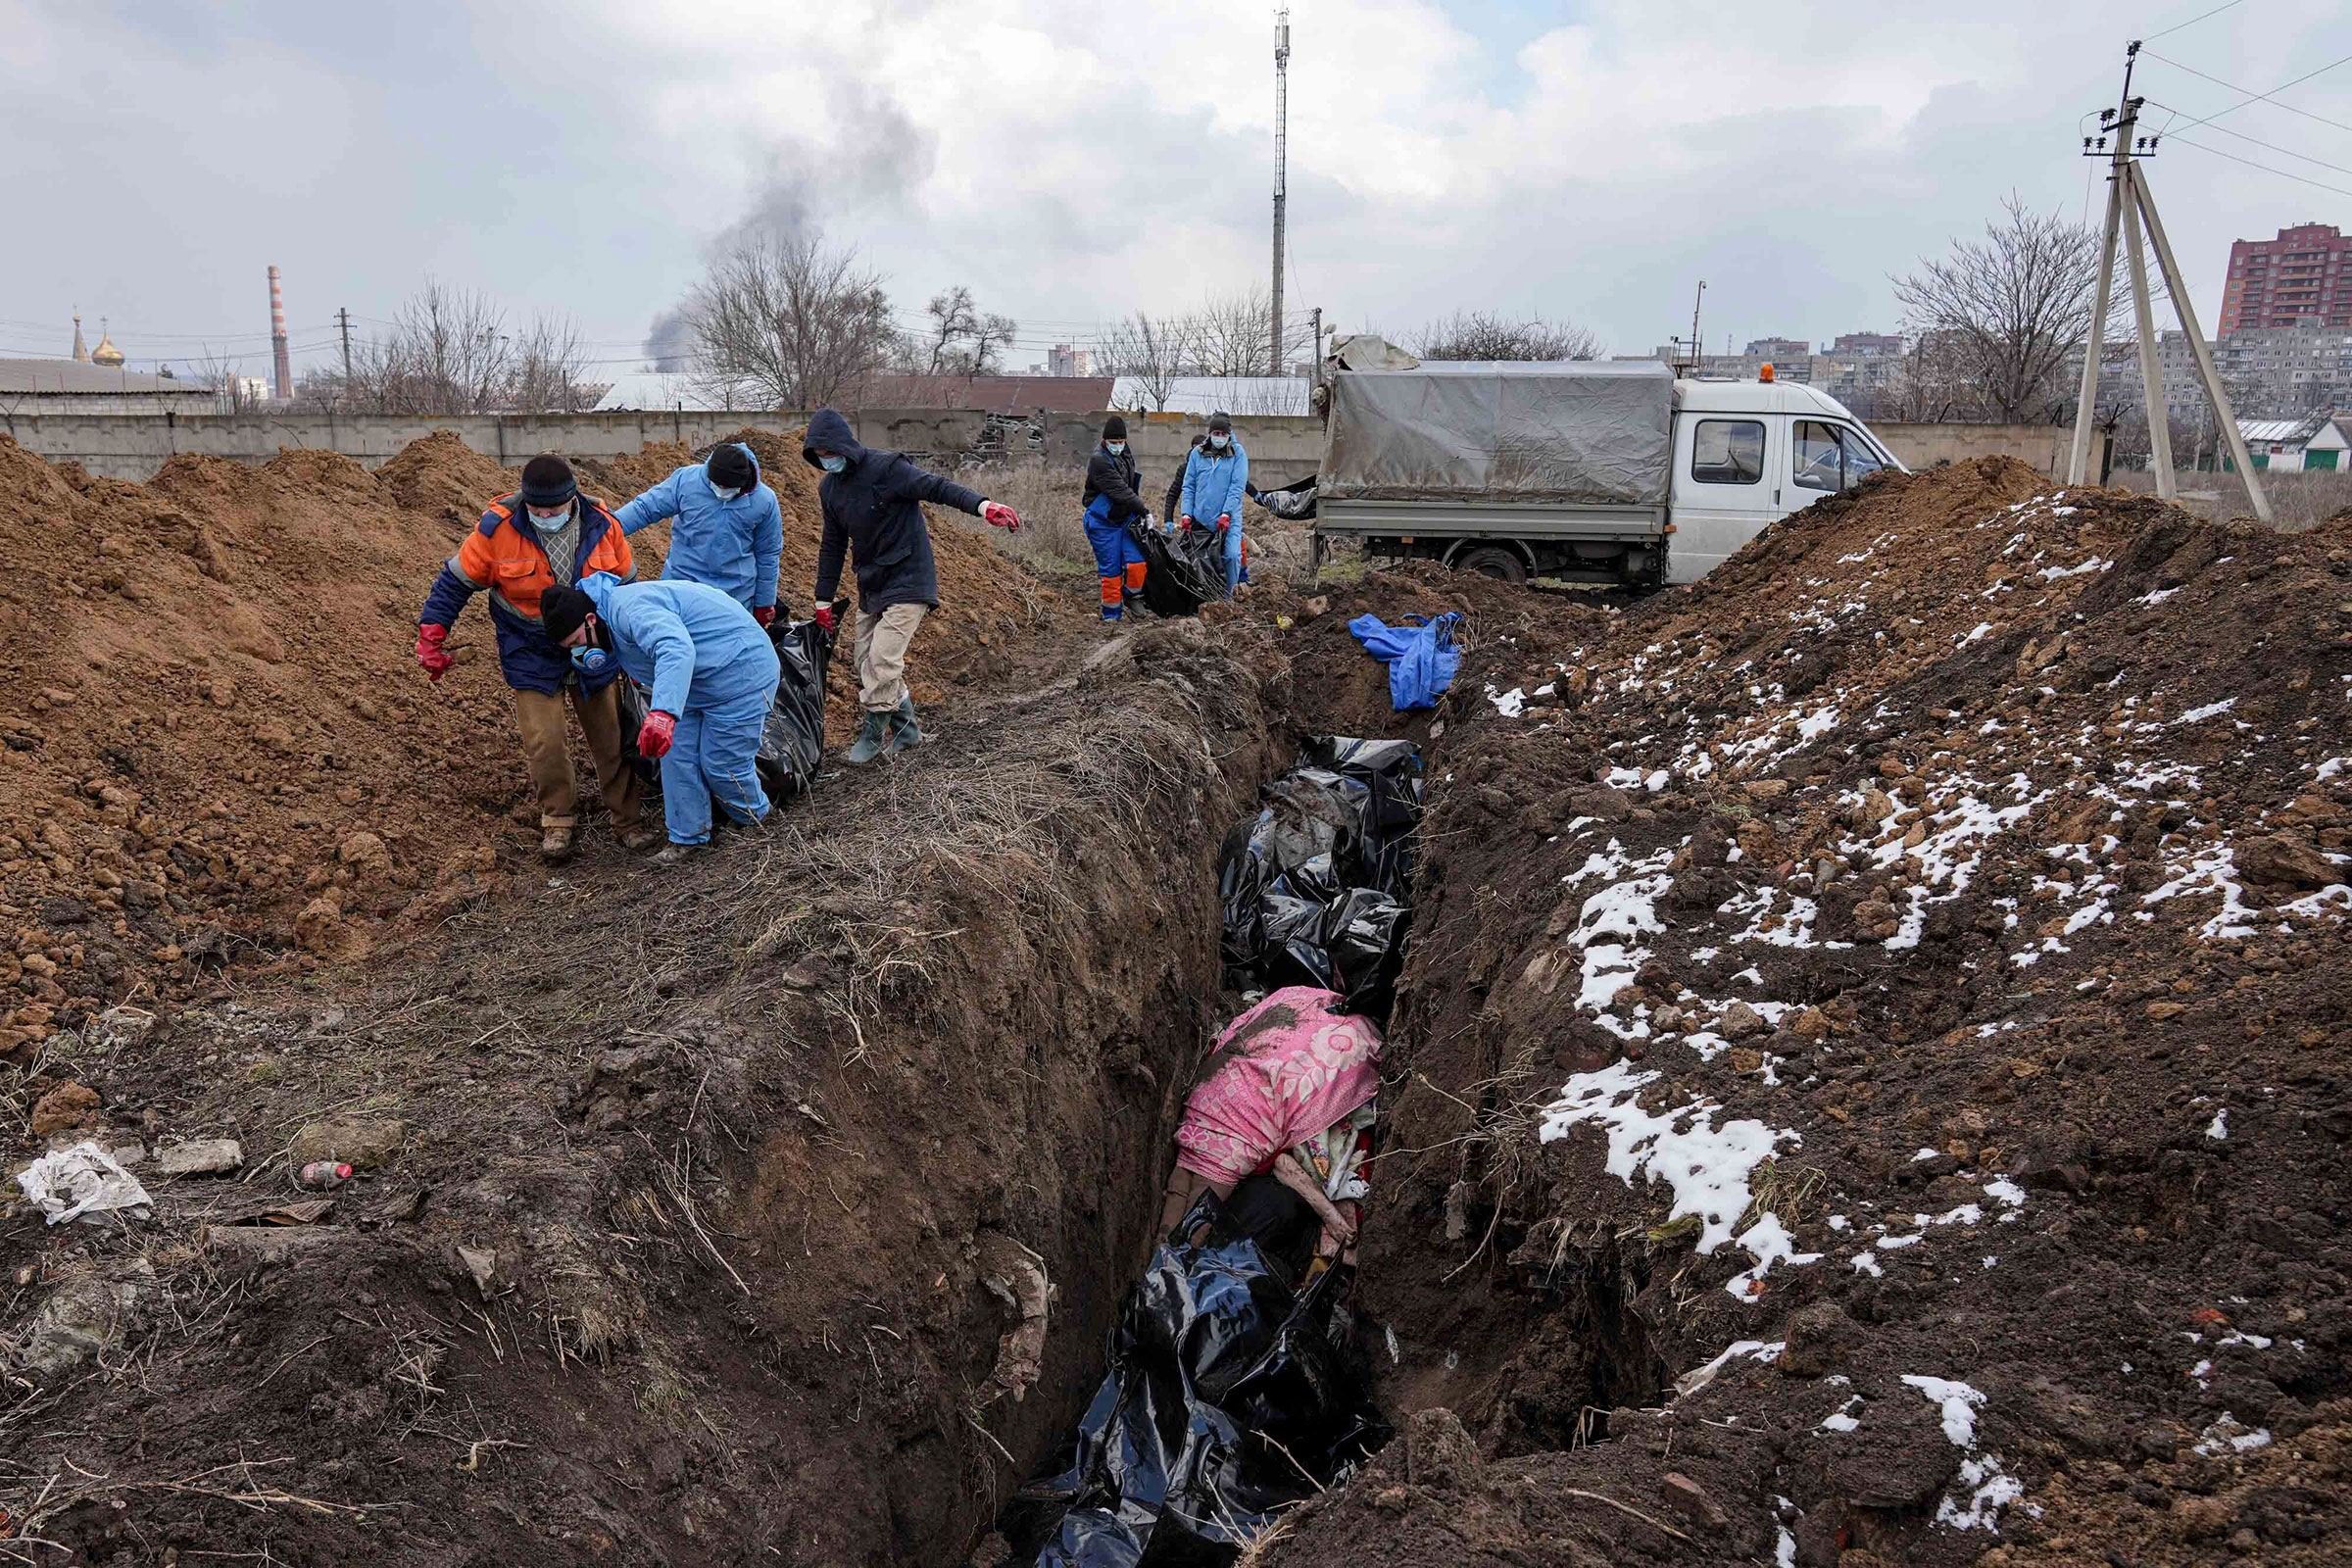 Dead bodies are put into a mass grave on the outskirts of Mariupol on March 9 as people cannot bury their dead because of the heavy shelling by Russian forces. (Evgeniy Maloletka—AP)